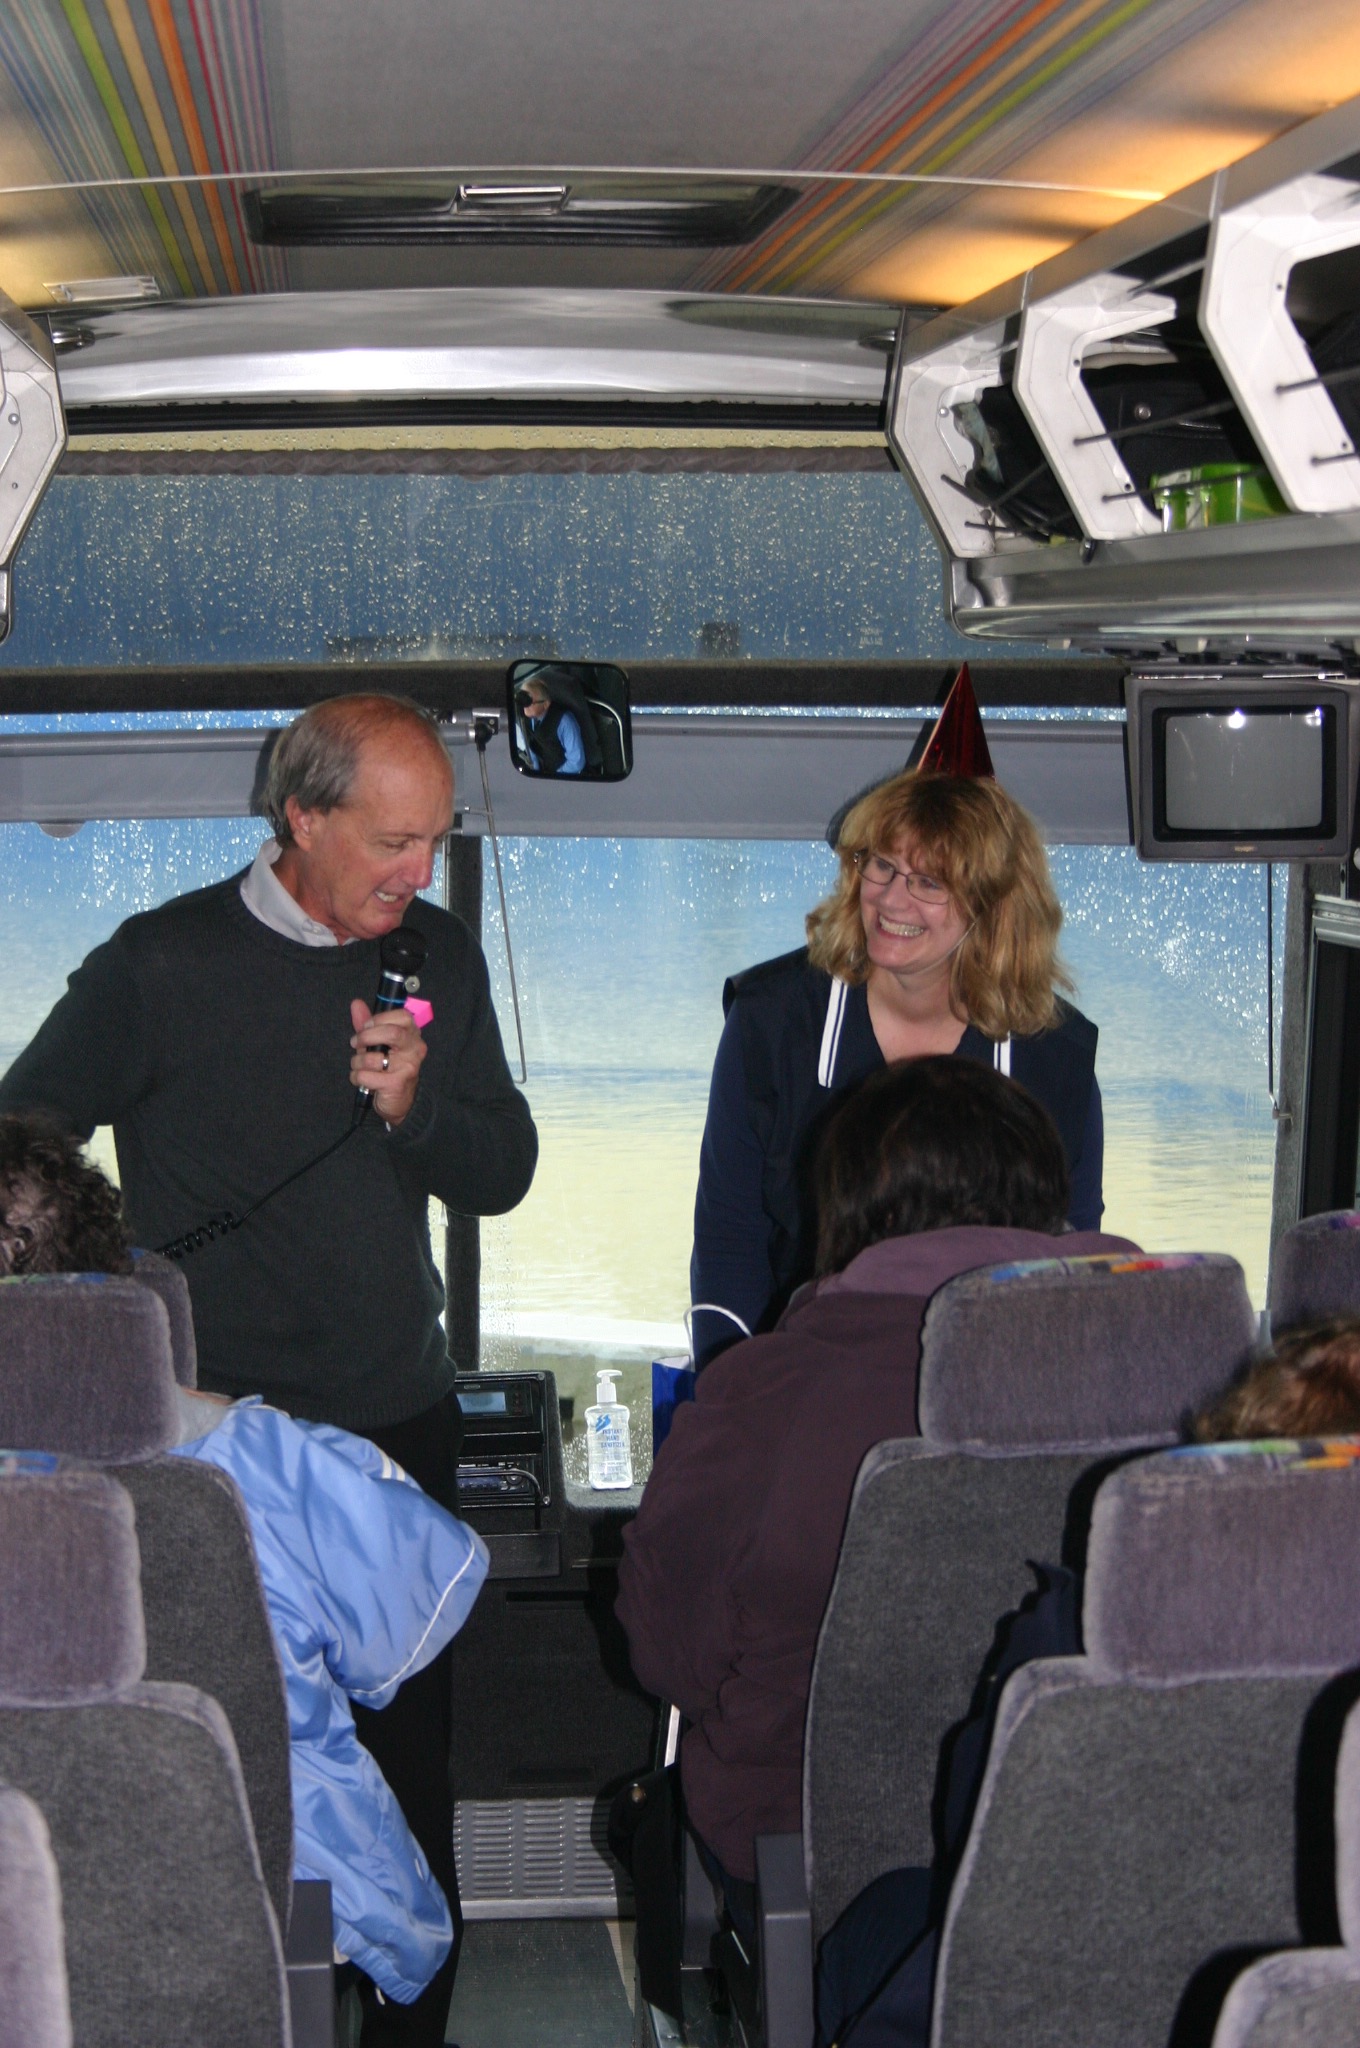 Rod Koon, left, and Leslie Barstow take visitors on a bus tour of Port of Tacoma facilities. Credit: David Guest / TDI